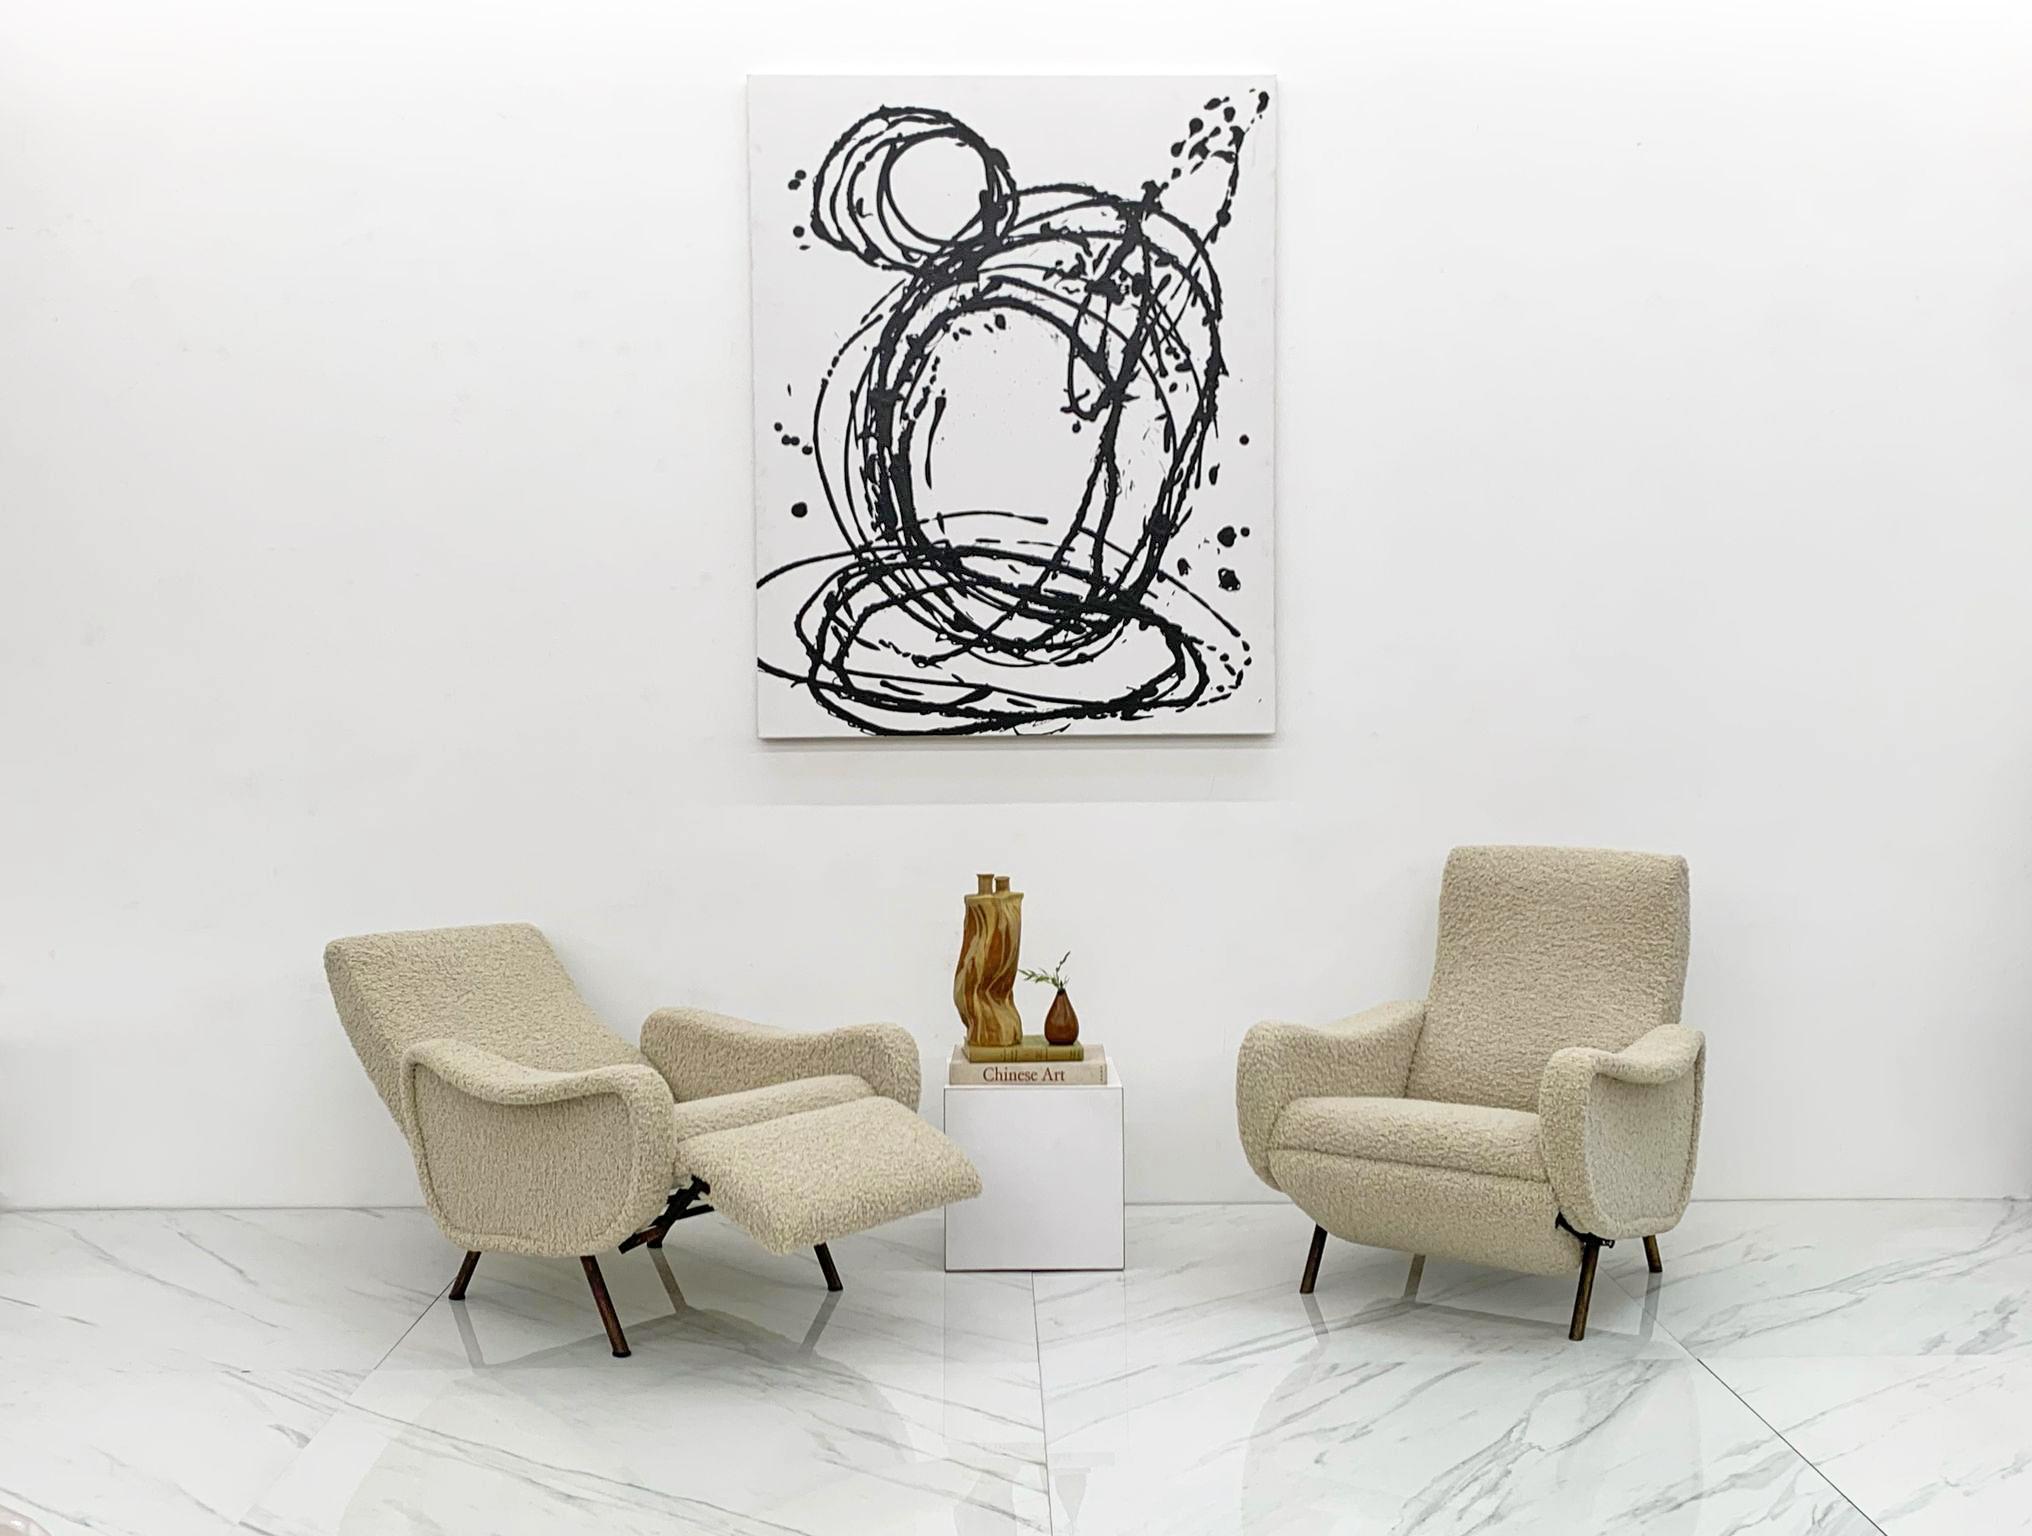 These chairs are absolutely stunning! A rare pair of Marco Zanuso reclining lady armchairs labelled Pizzetti Roma, these lady chairs are as timeless as it gets. Upholstered in a light teddy-bear tan boucle, these soft, curvy chairs are icons of mid